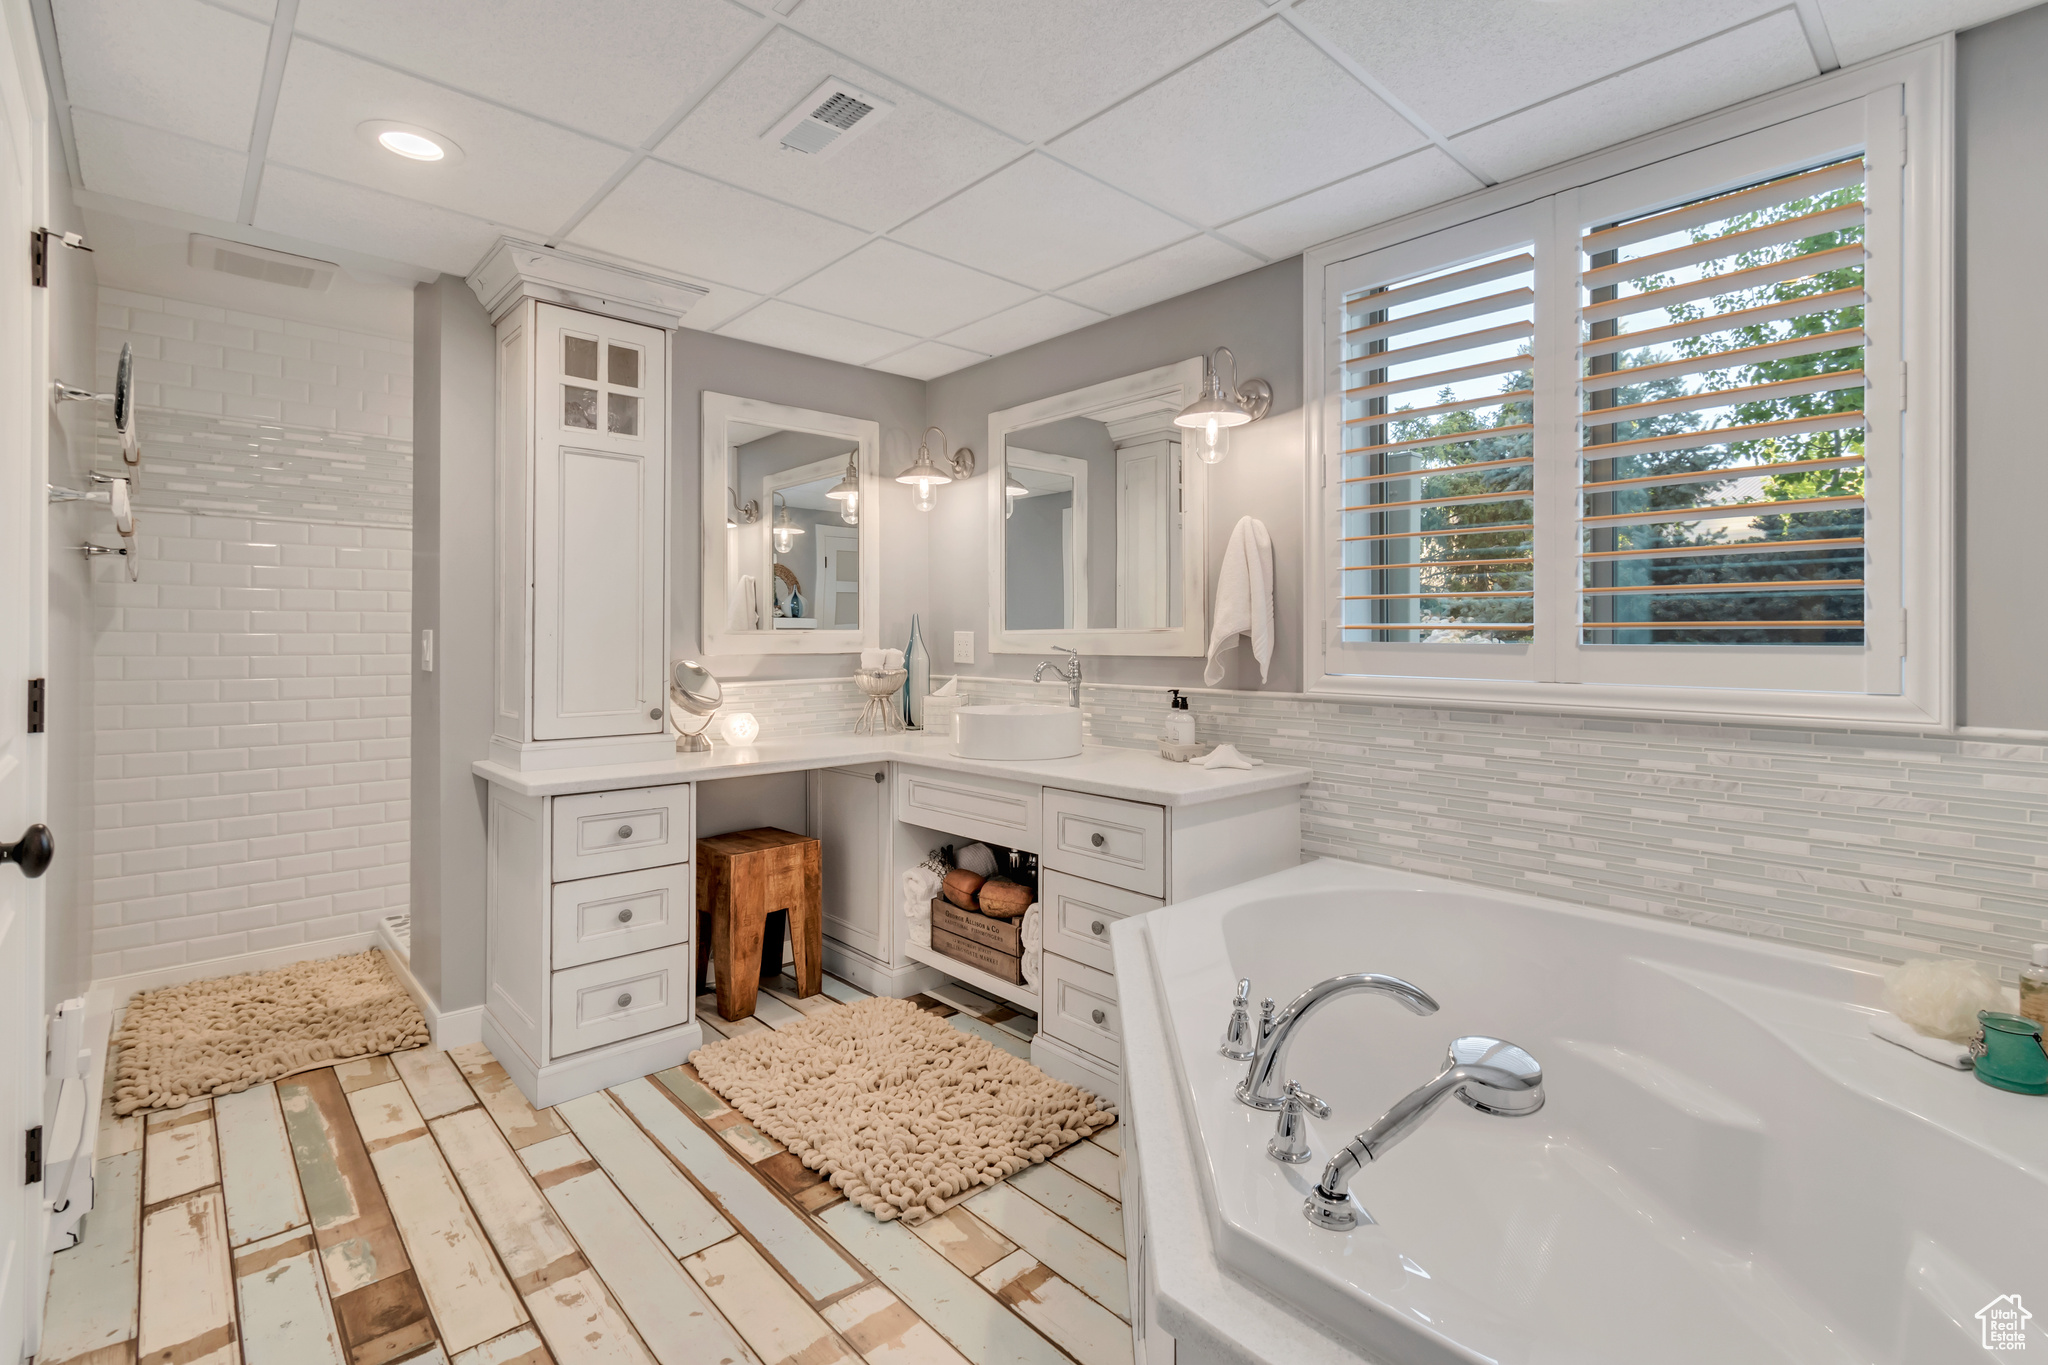 Basement master bathroom with soaker tub, separate walk in shower, walk-in closet, and spacious vanity